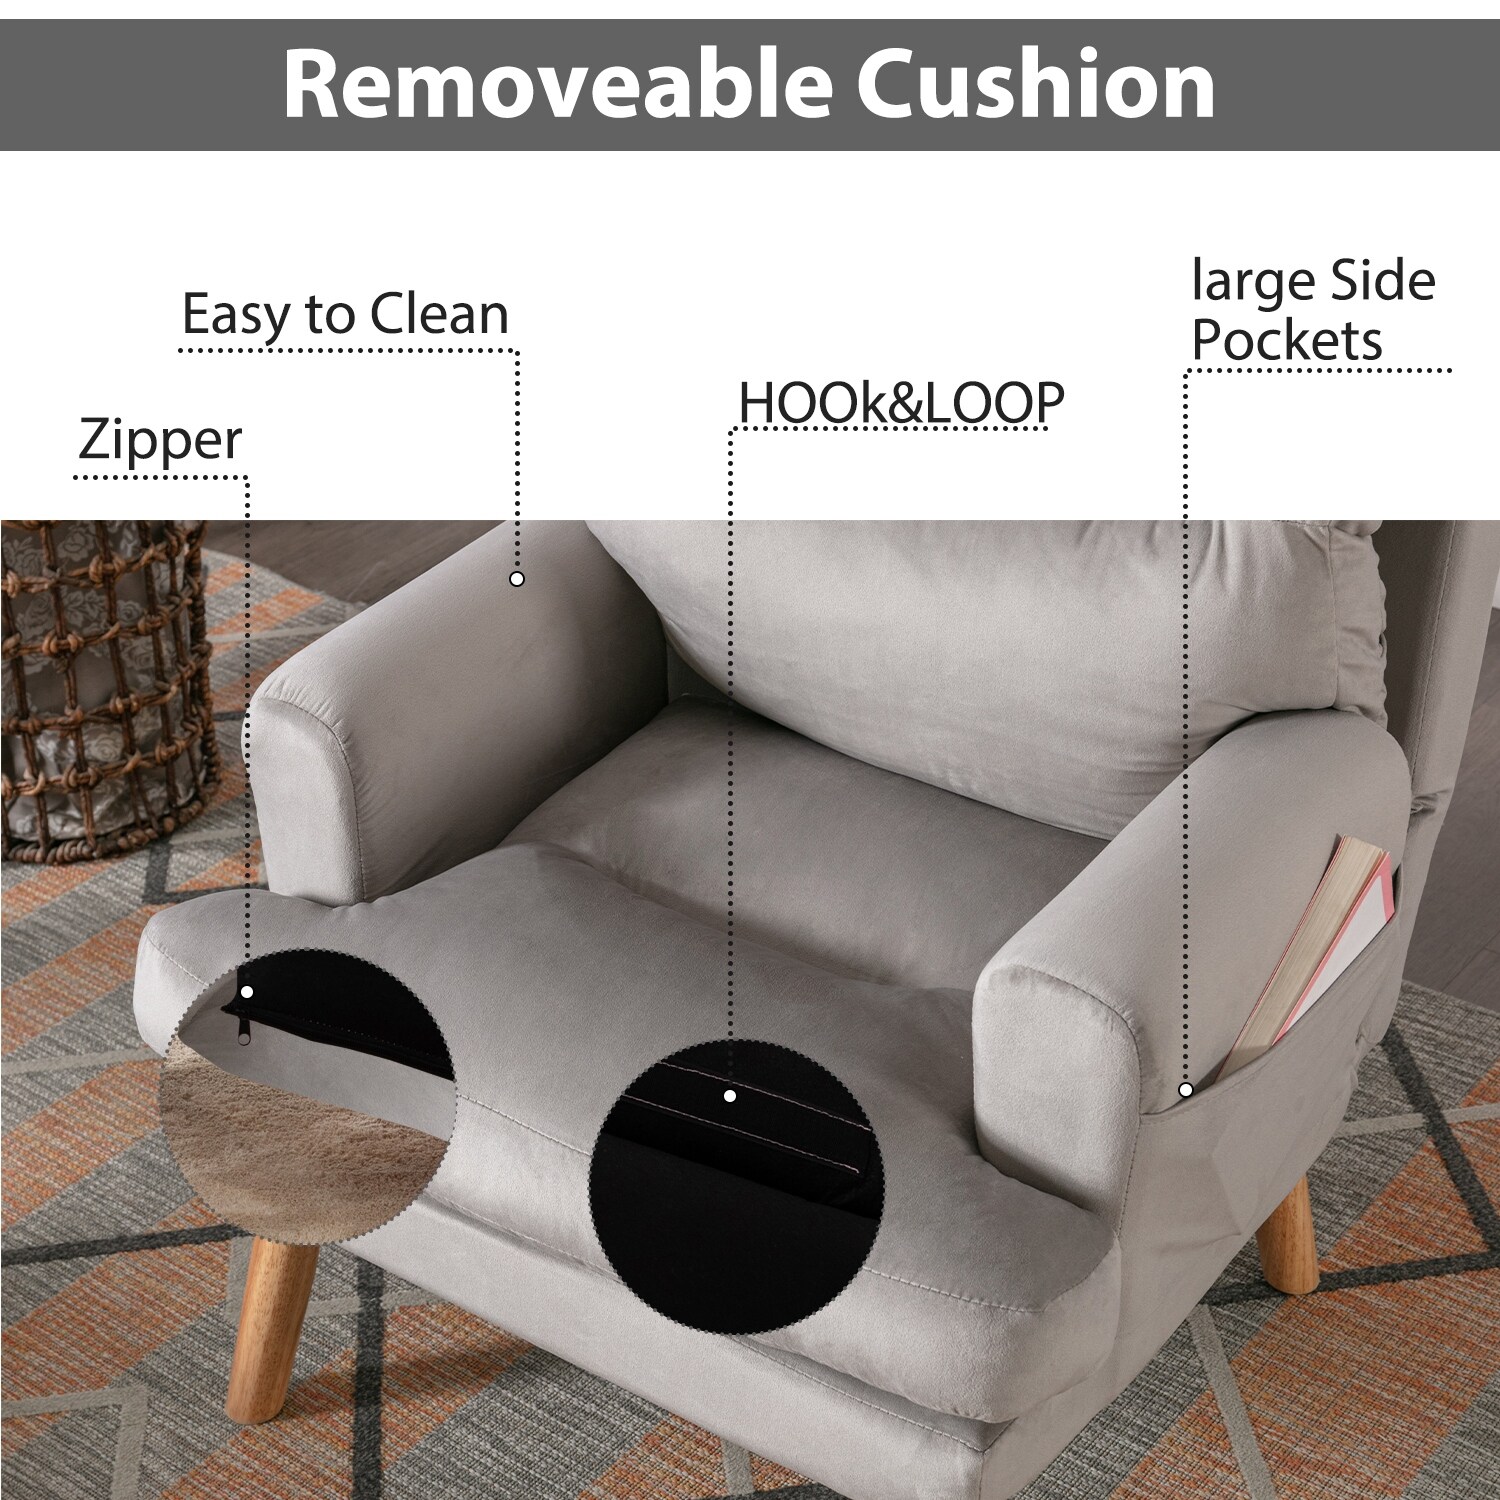 https://ak1.ostkcdn.com/images/products/is/images/direct/8102b7ac0a715605c10880aa67af45c7e20d56da/Soft-Fabric-Armchair-with-Adjustable-Backrest-and-Side-Pockets%2Cwith-Ottoman.jpg